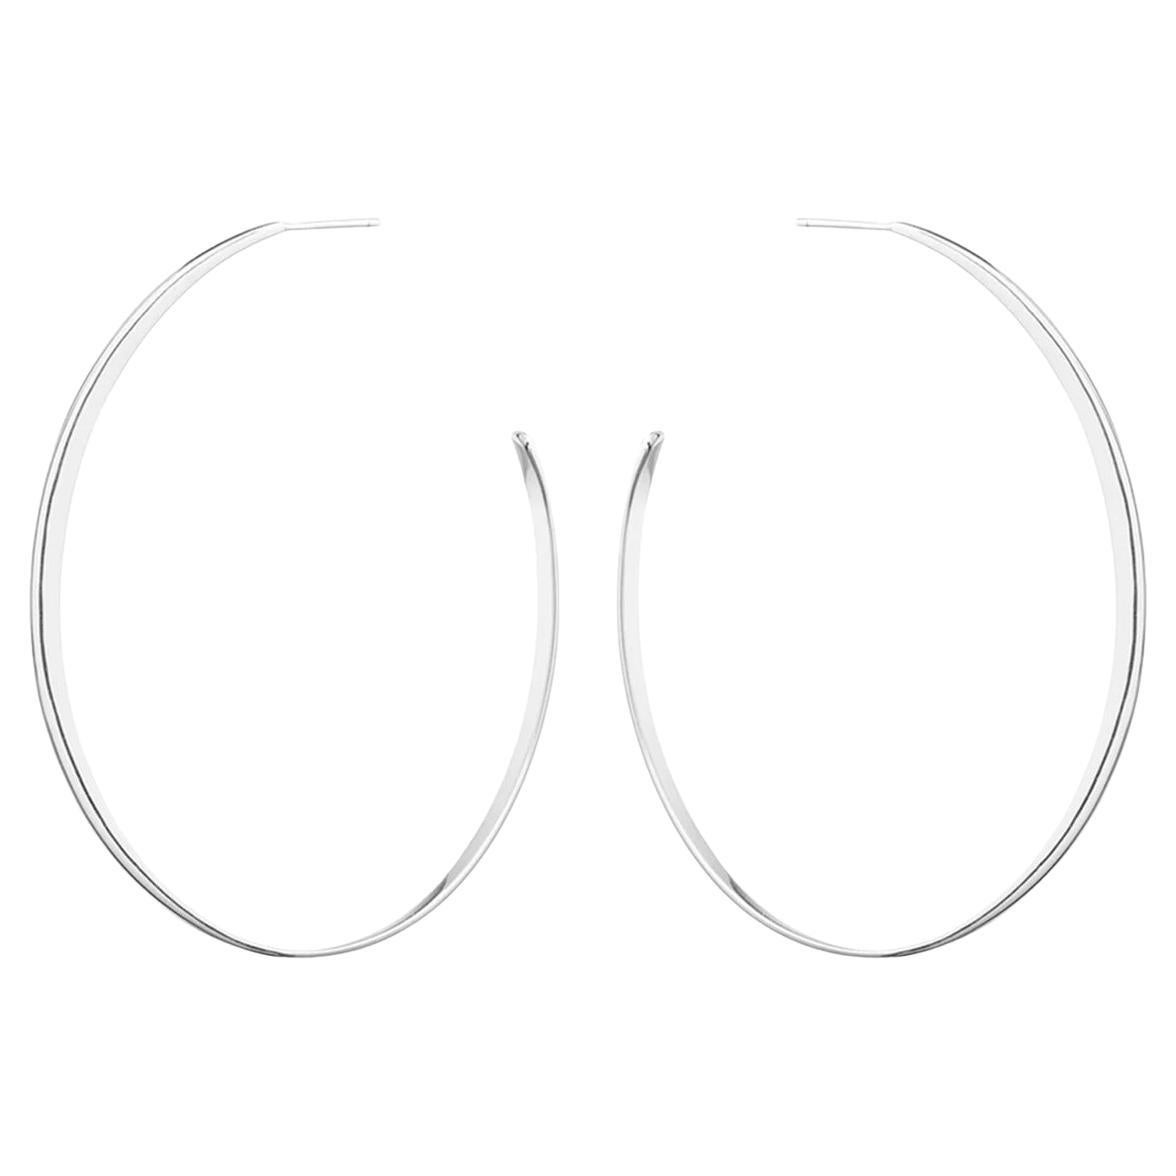 GLOW LARGE Earring - sterling silver (a pair)